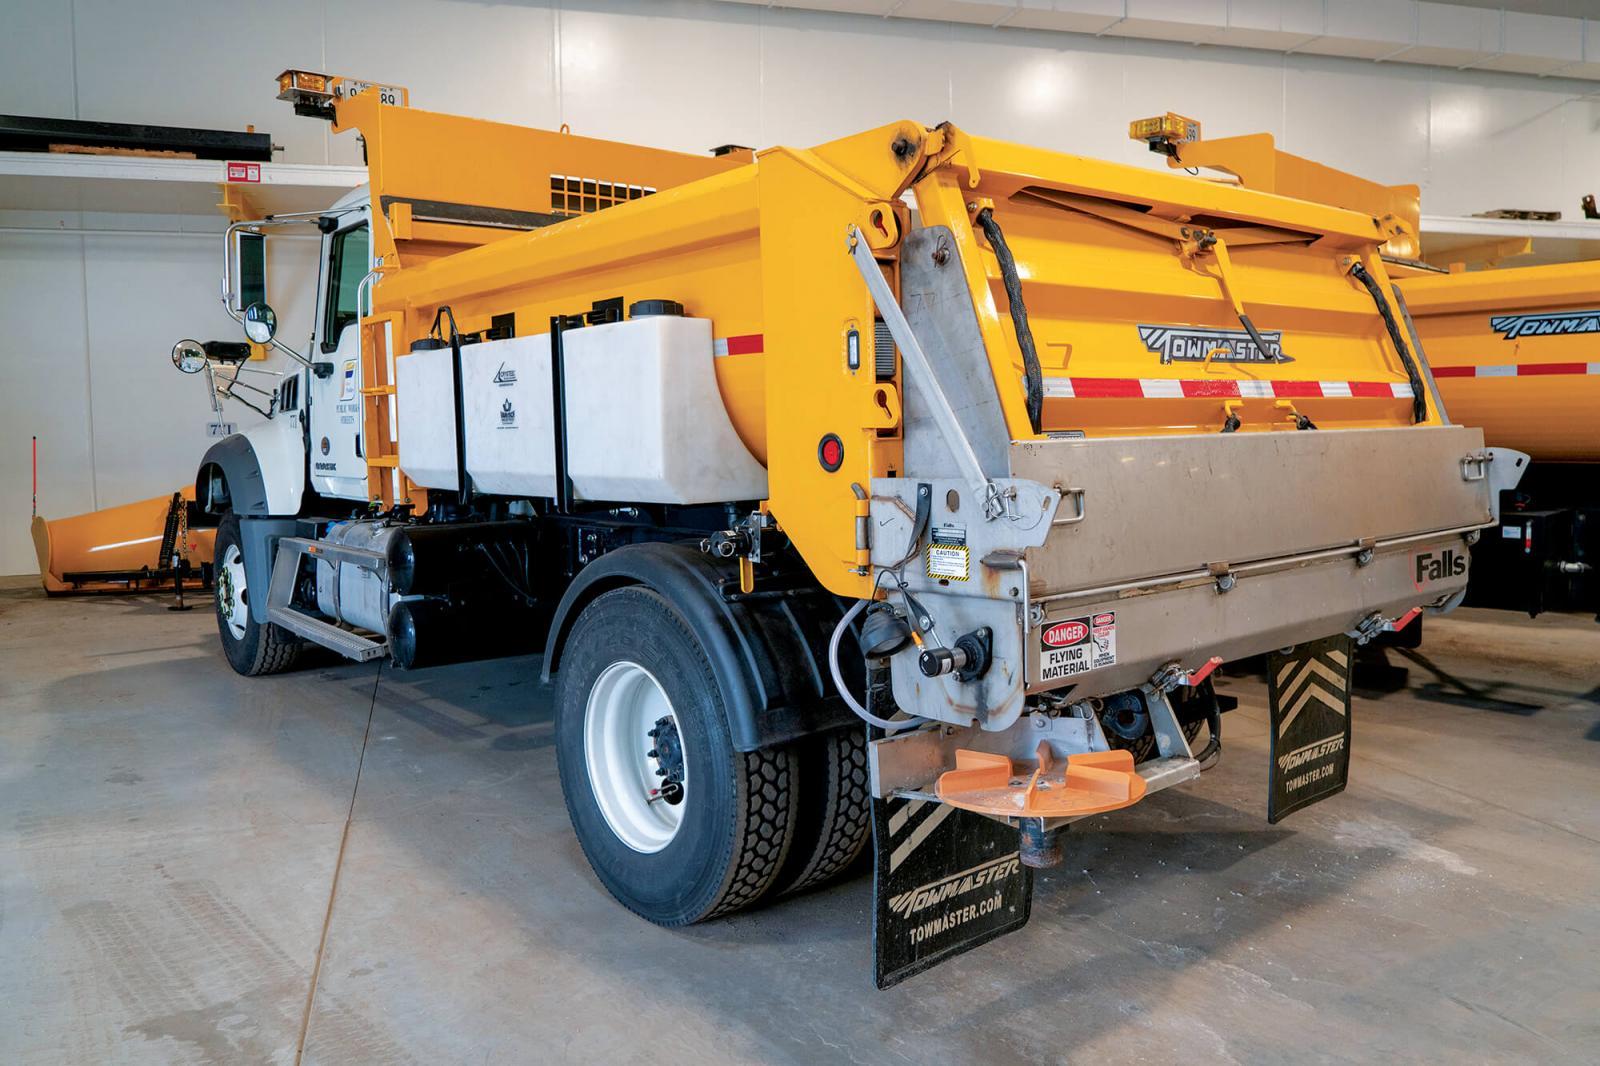 Trucks outfitted with brining equipment. This equipment allows the driver to “pre-wet” rock salt with brine before spreading it on the road. This helps the salt stick to the pavement, which improves its effectiveness and reduces the overall amount of salt needed to treat roadways for icy conditions.